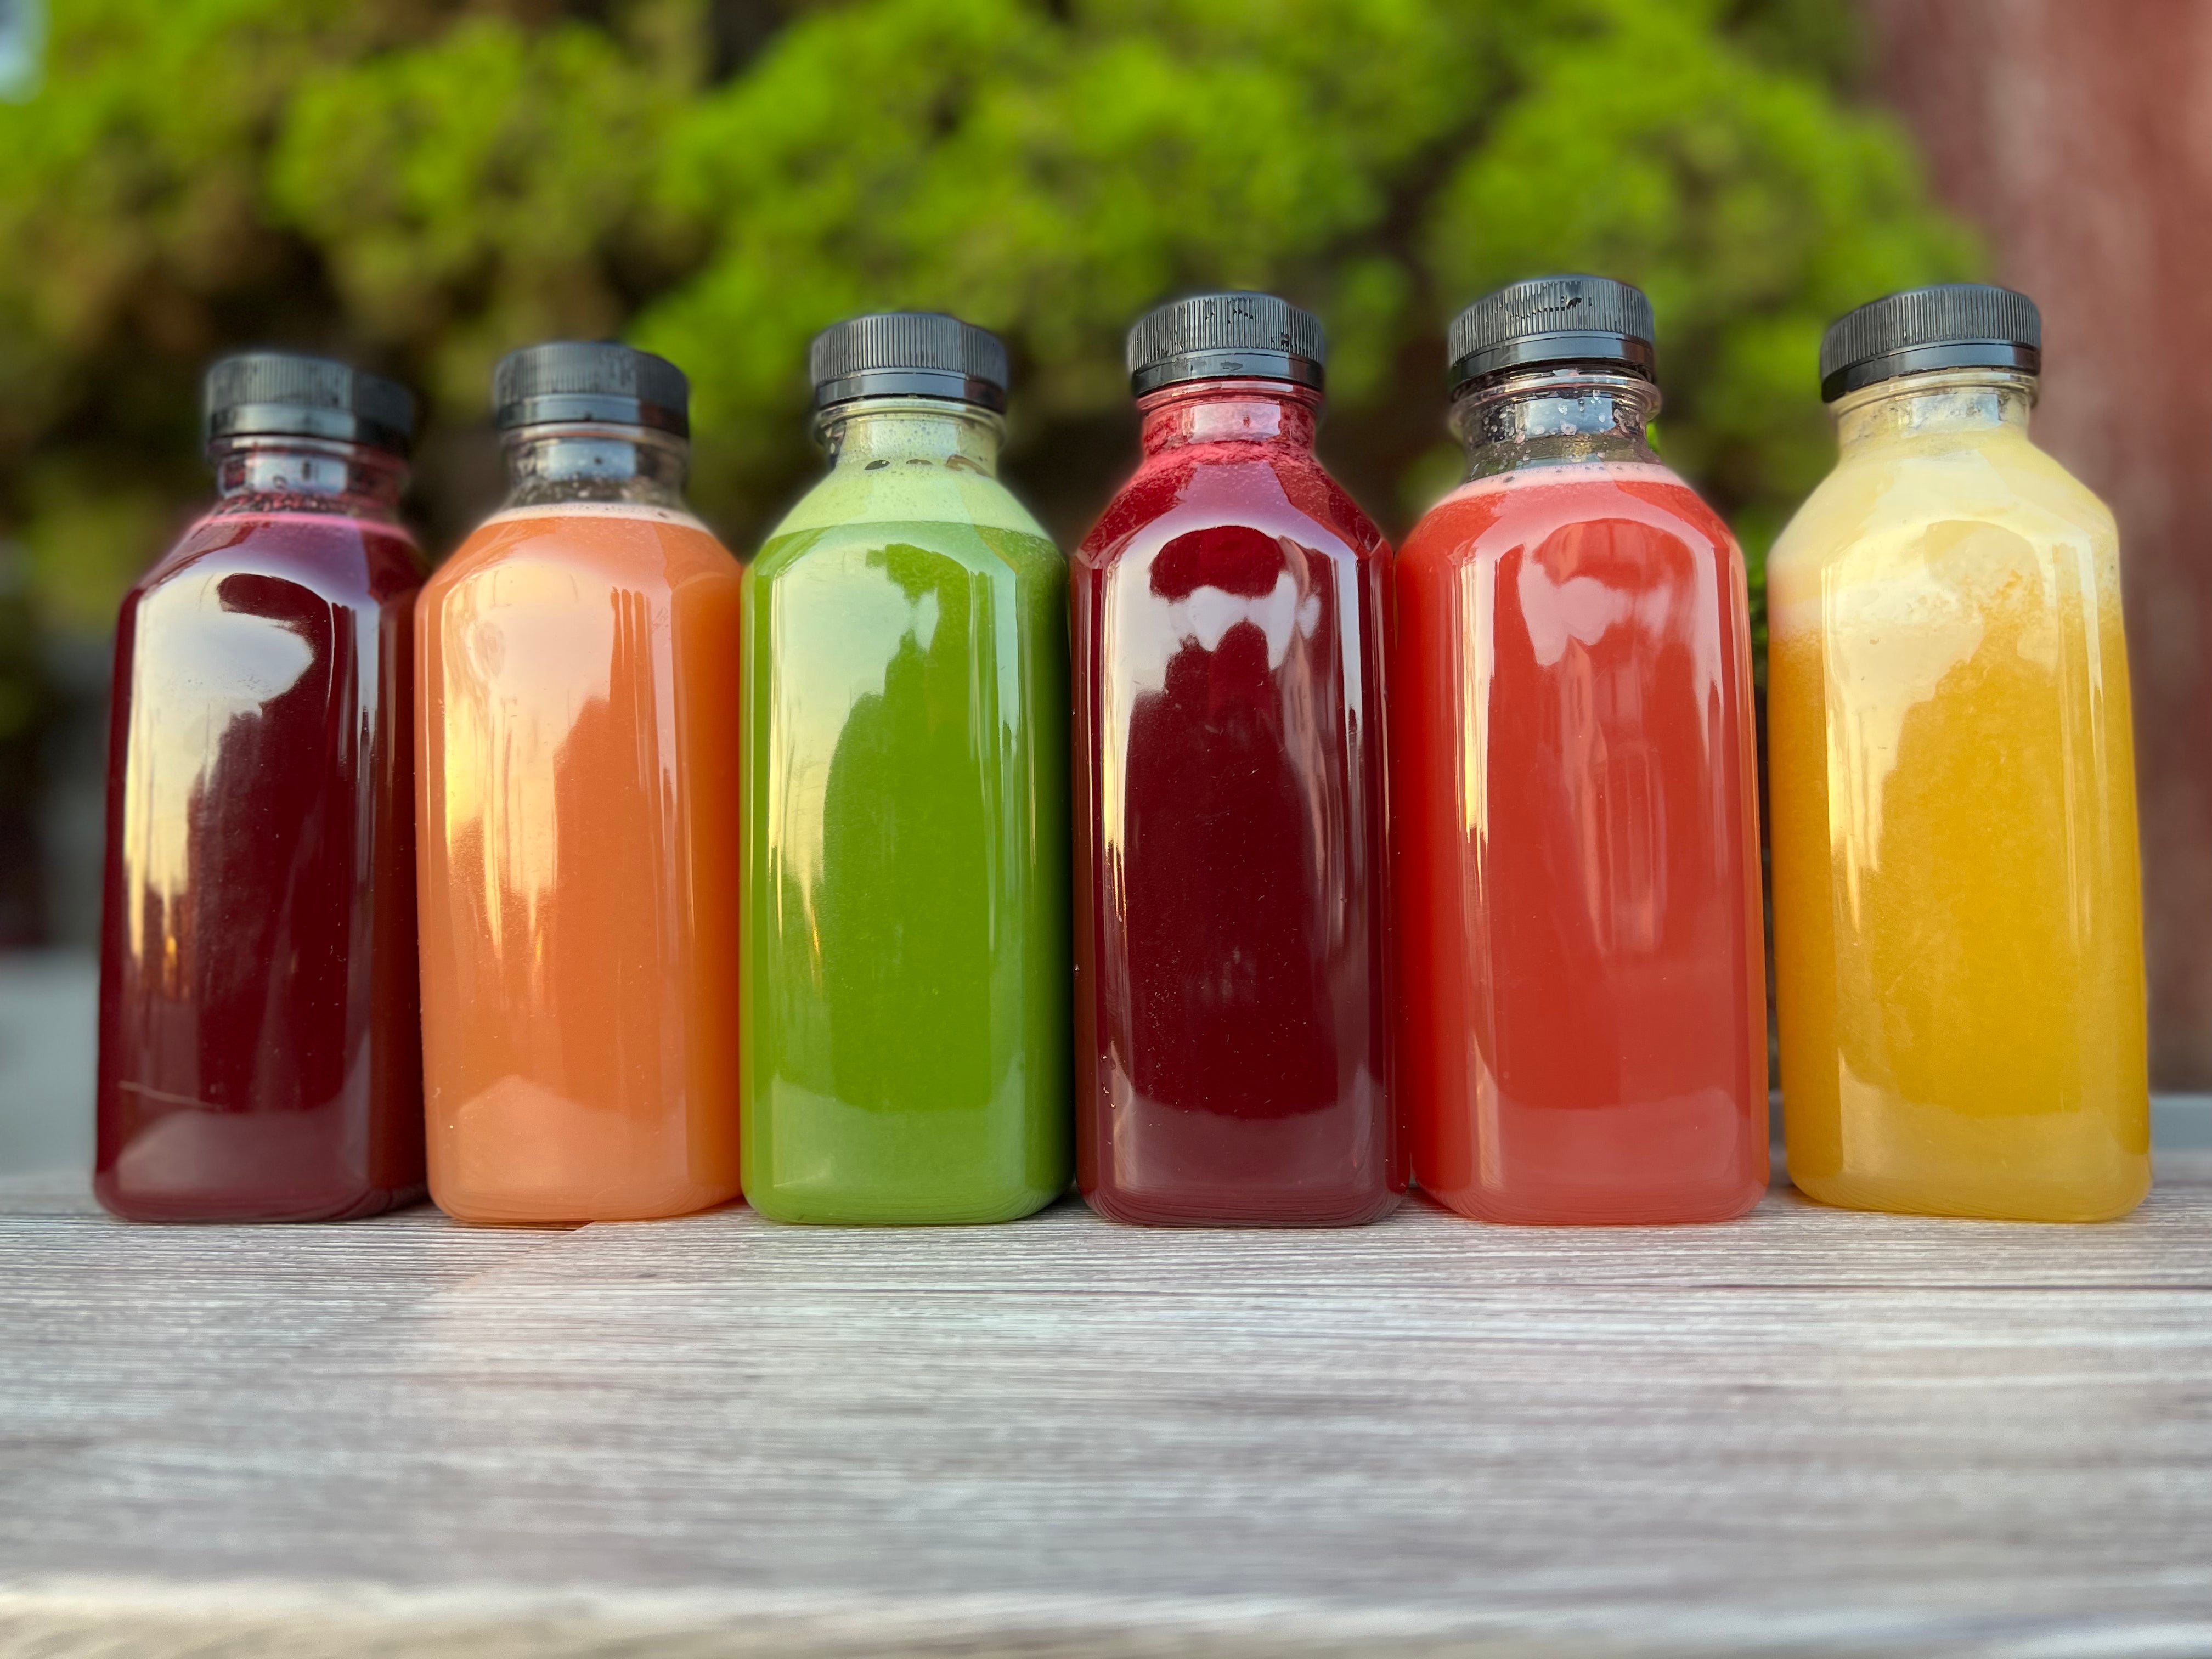 Cold pressed fruit juices for detox - 3 day detox cleanse